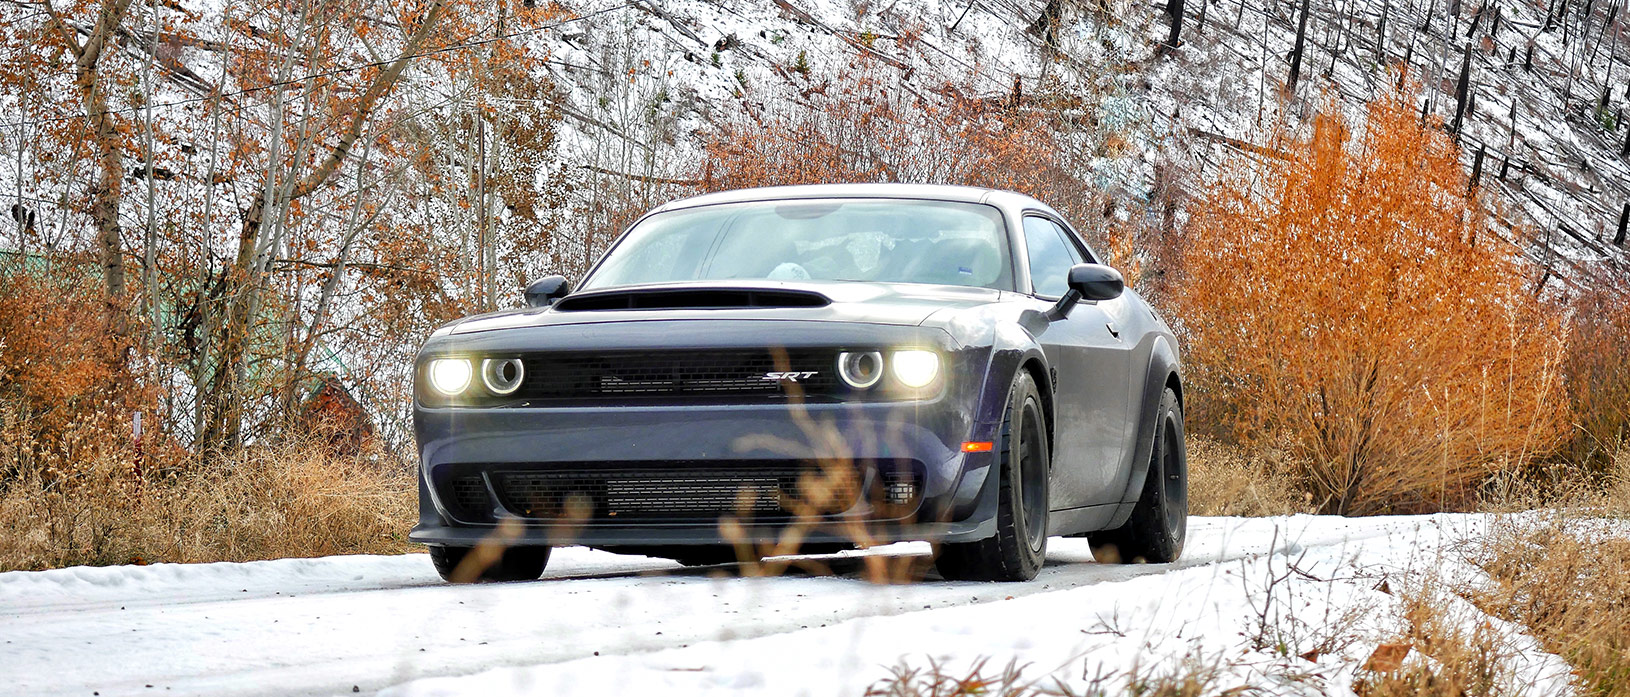 Challenger on snow covered road